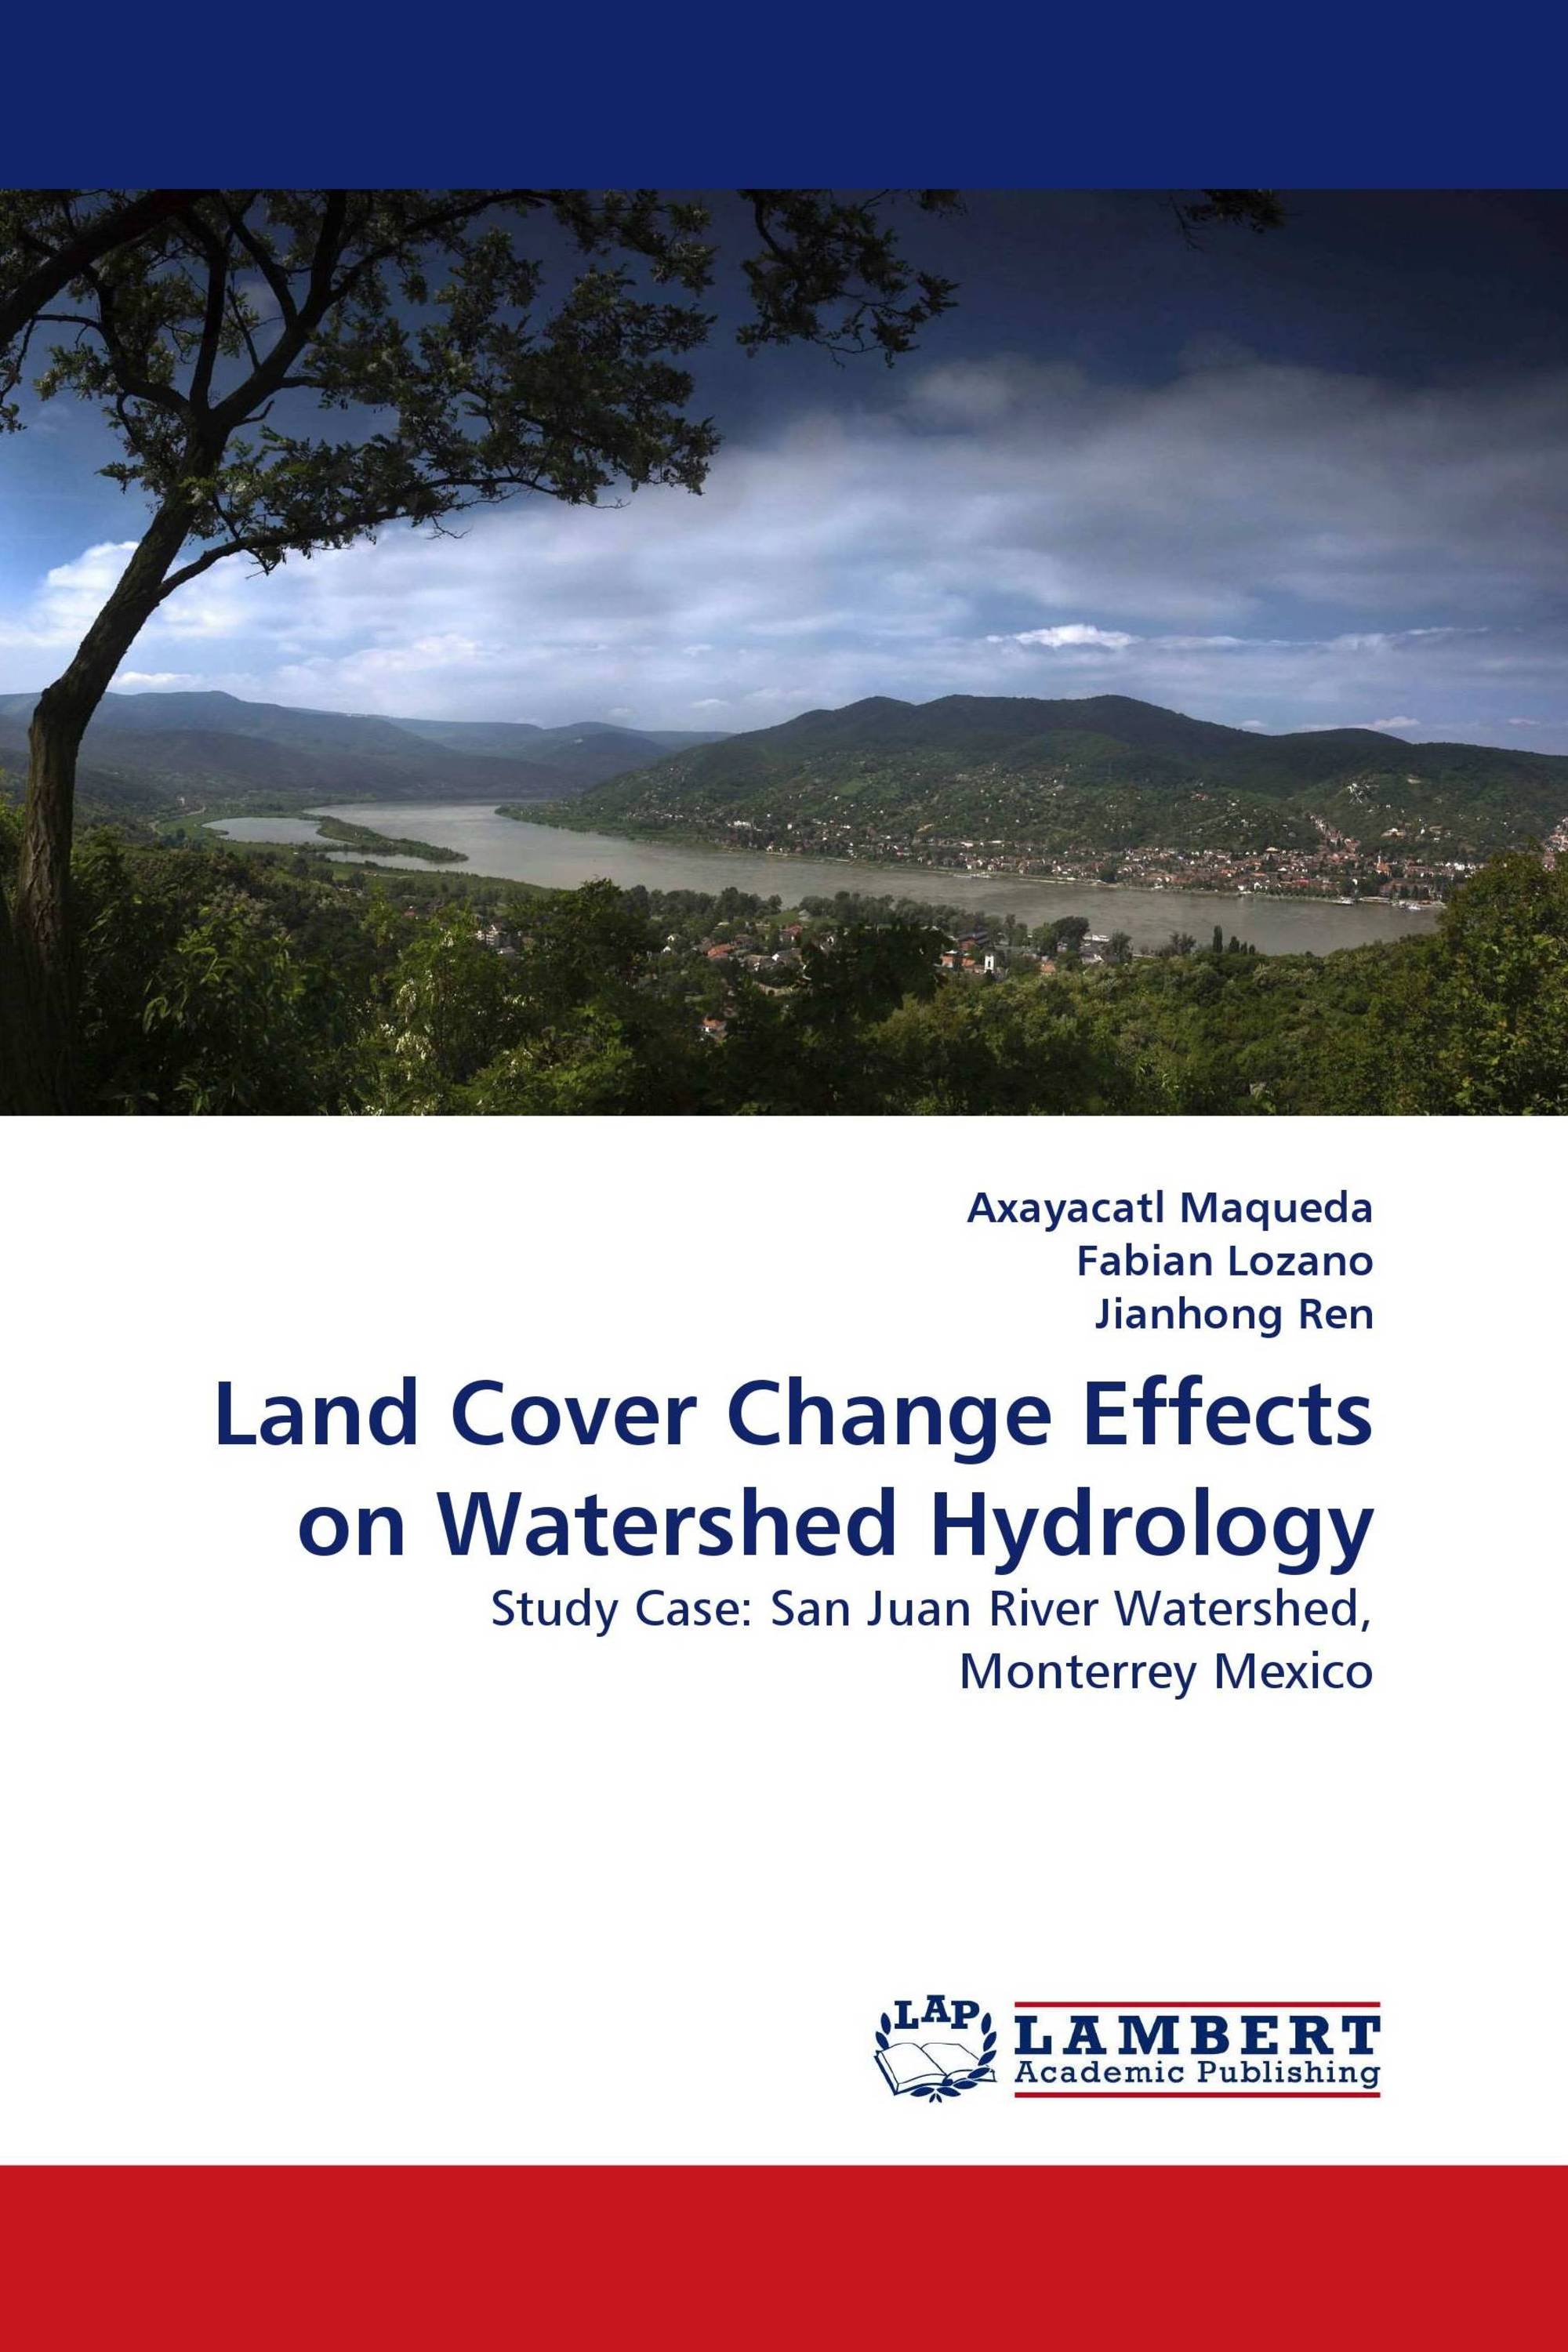 Land Cover Change Effects on Watershed Hydrology